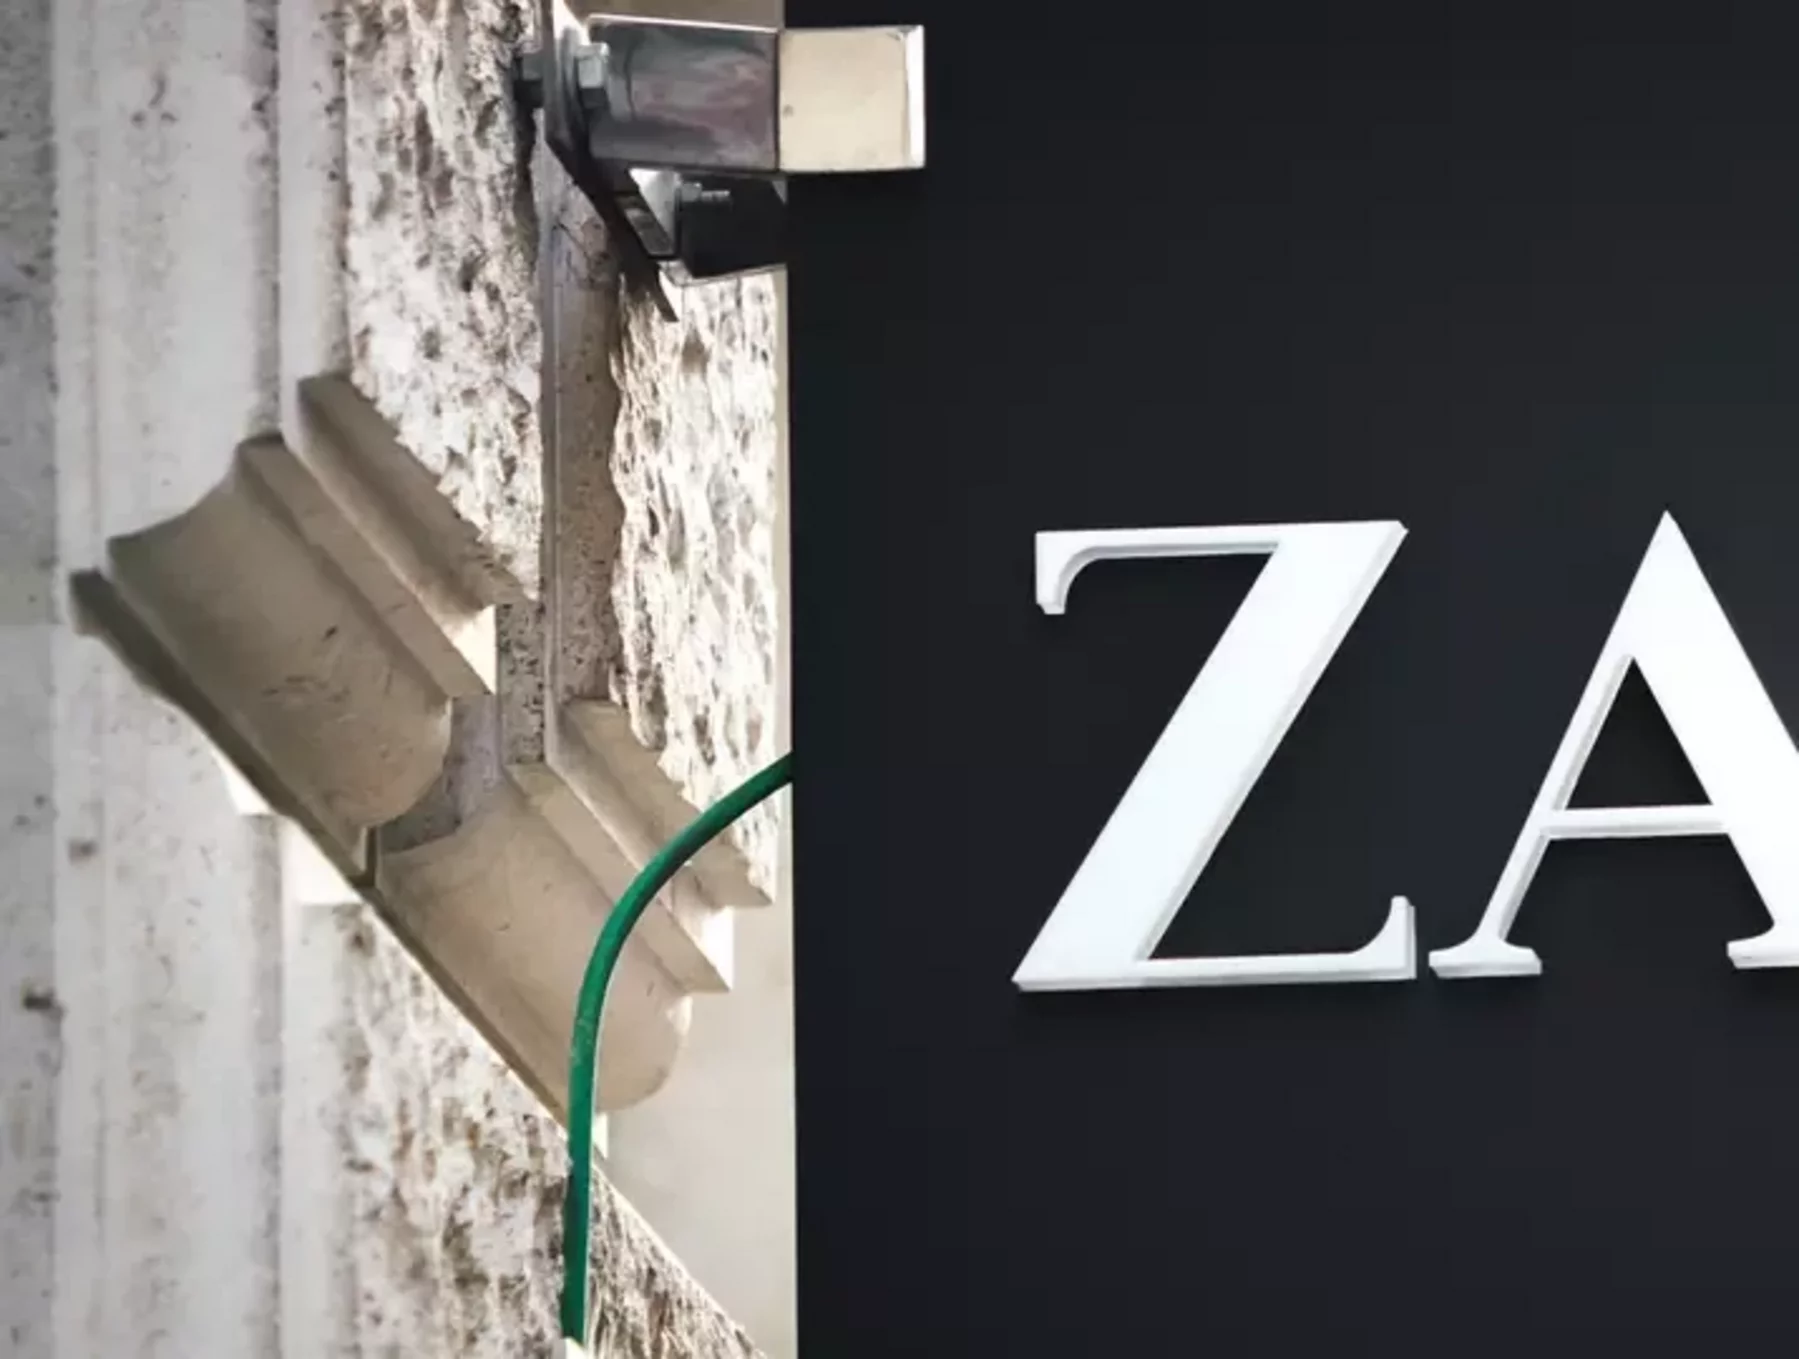 What Makes Zara's Join Life Branding Initiative Sustainable